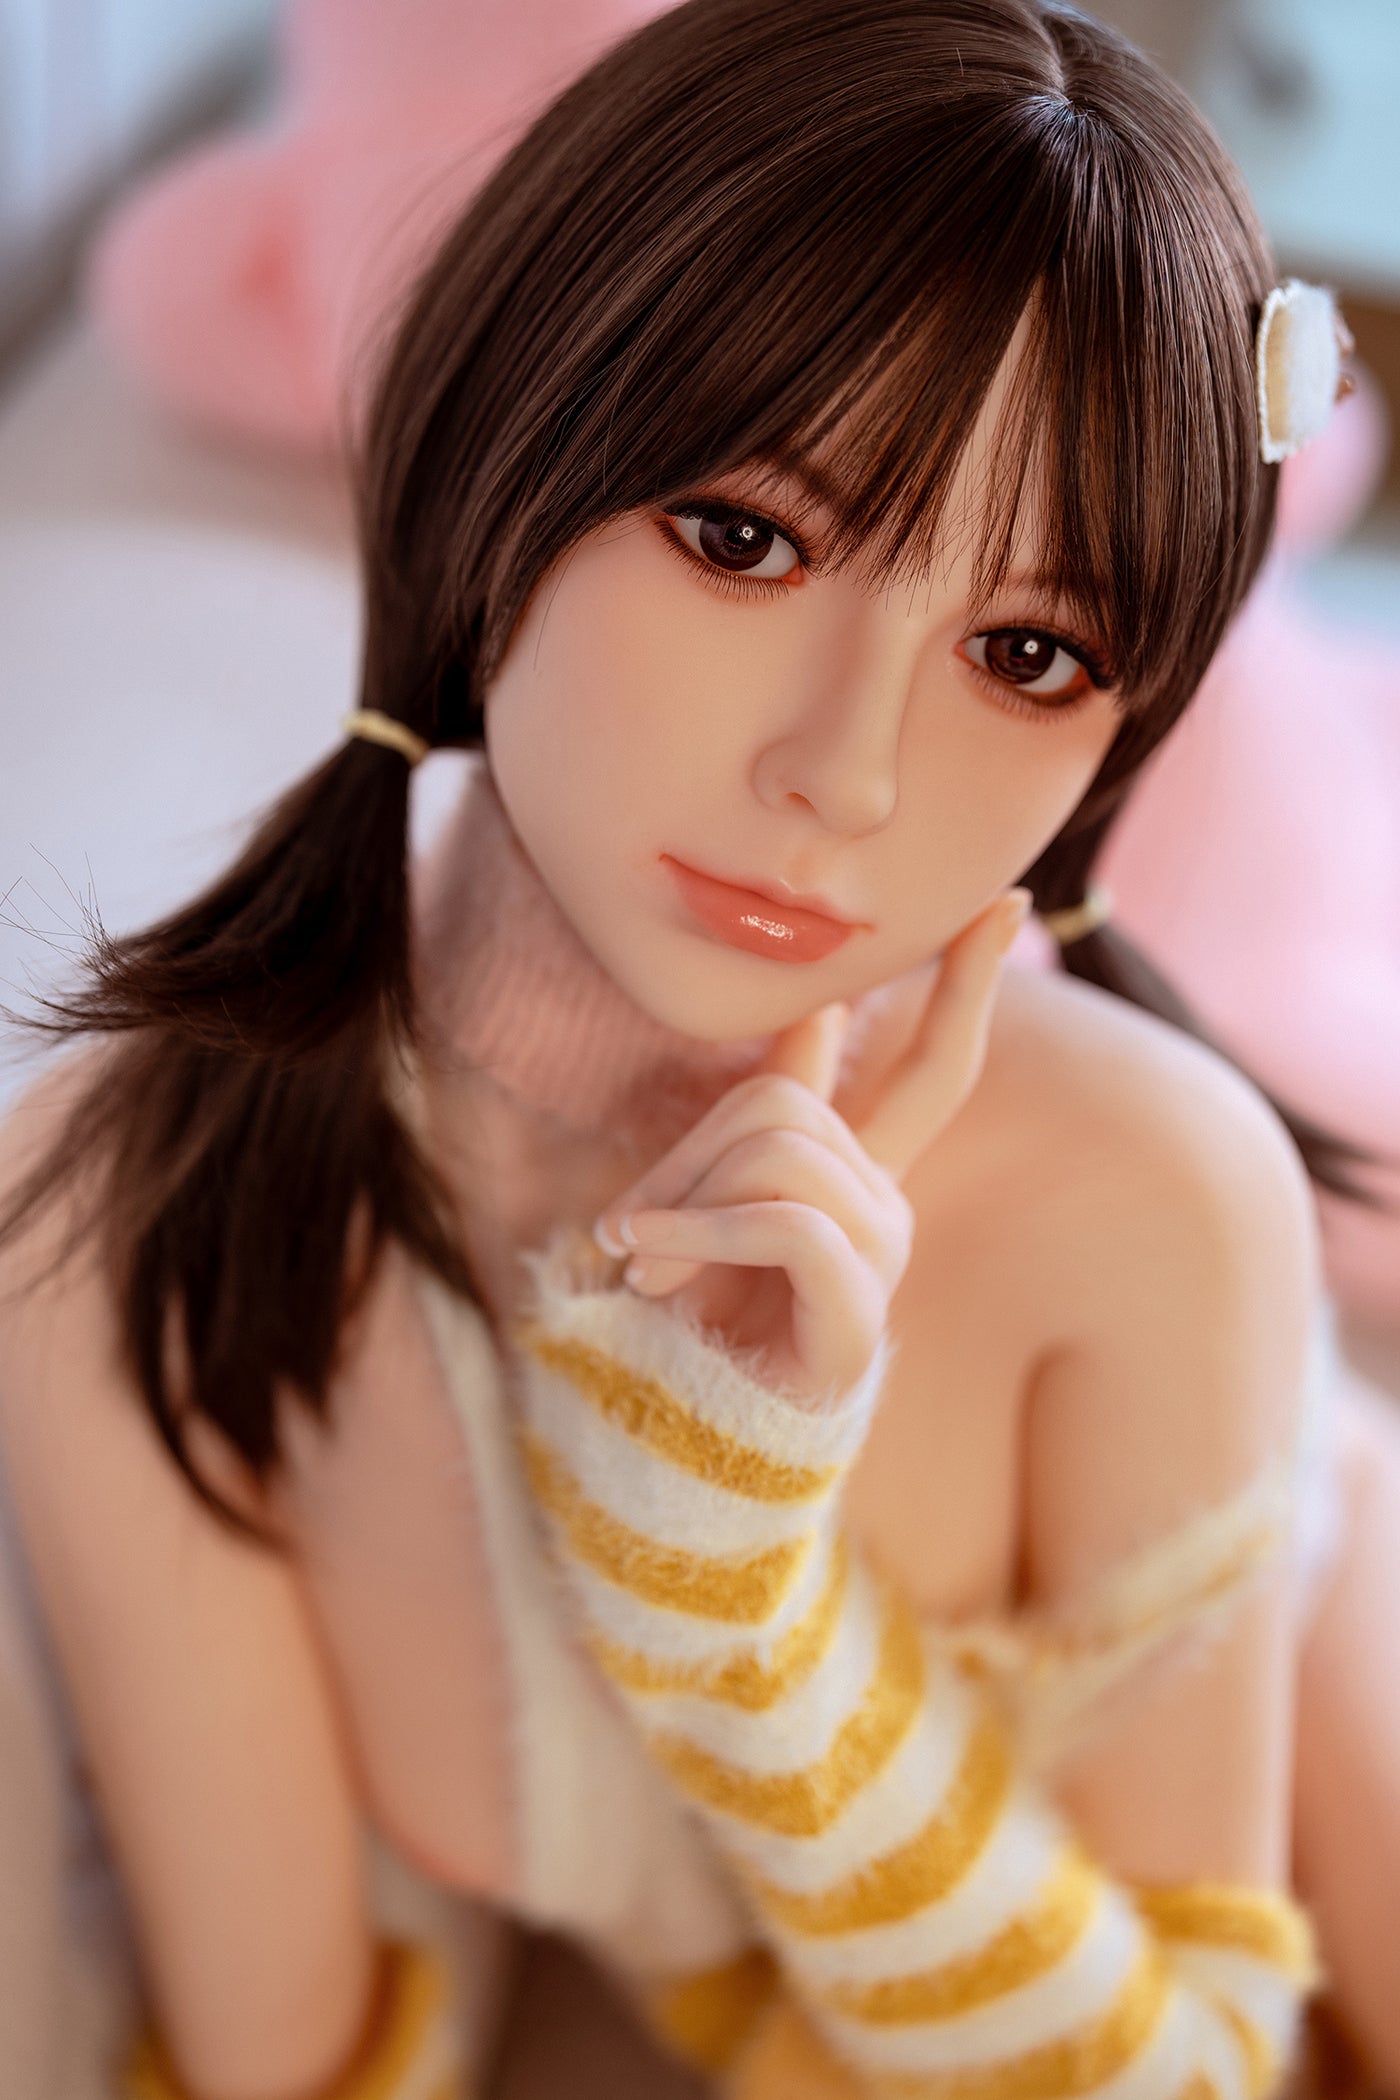 Norma 4ft92/ 150cm #311 Head Full TPE Asian Young Girl Petite Realistic Flat Chest Teen Sex Doll